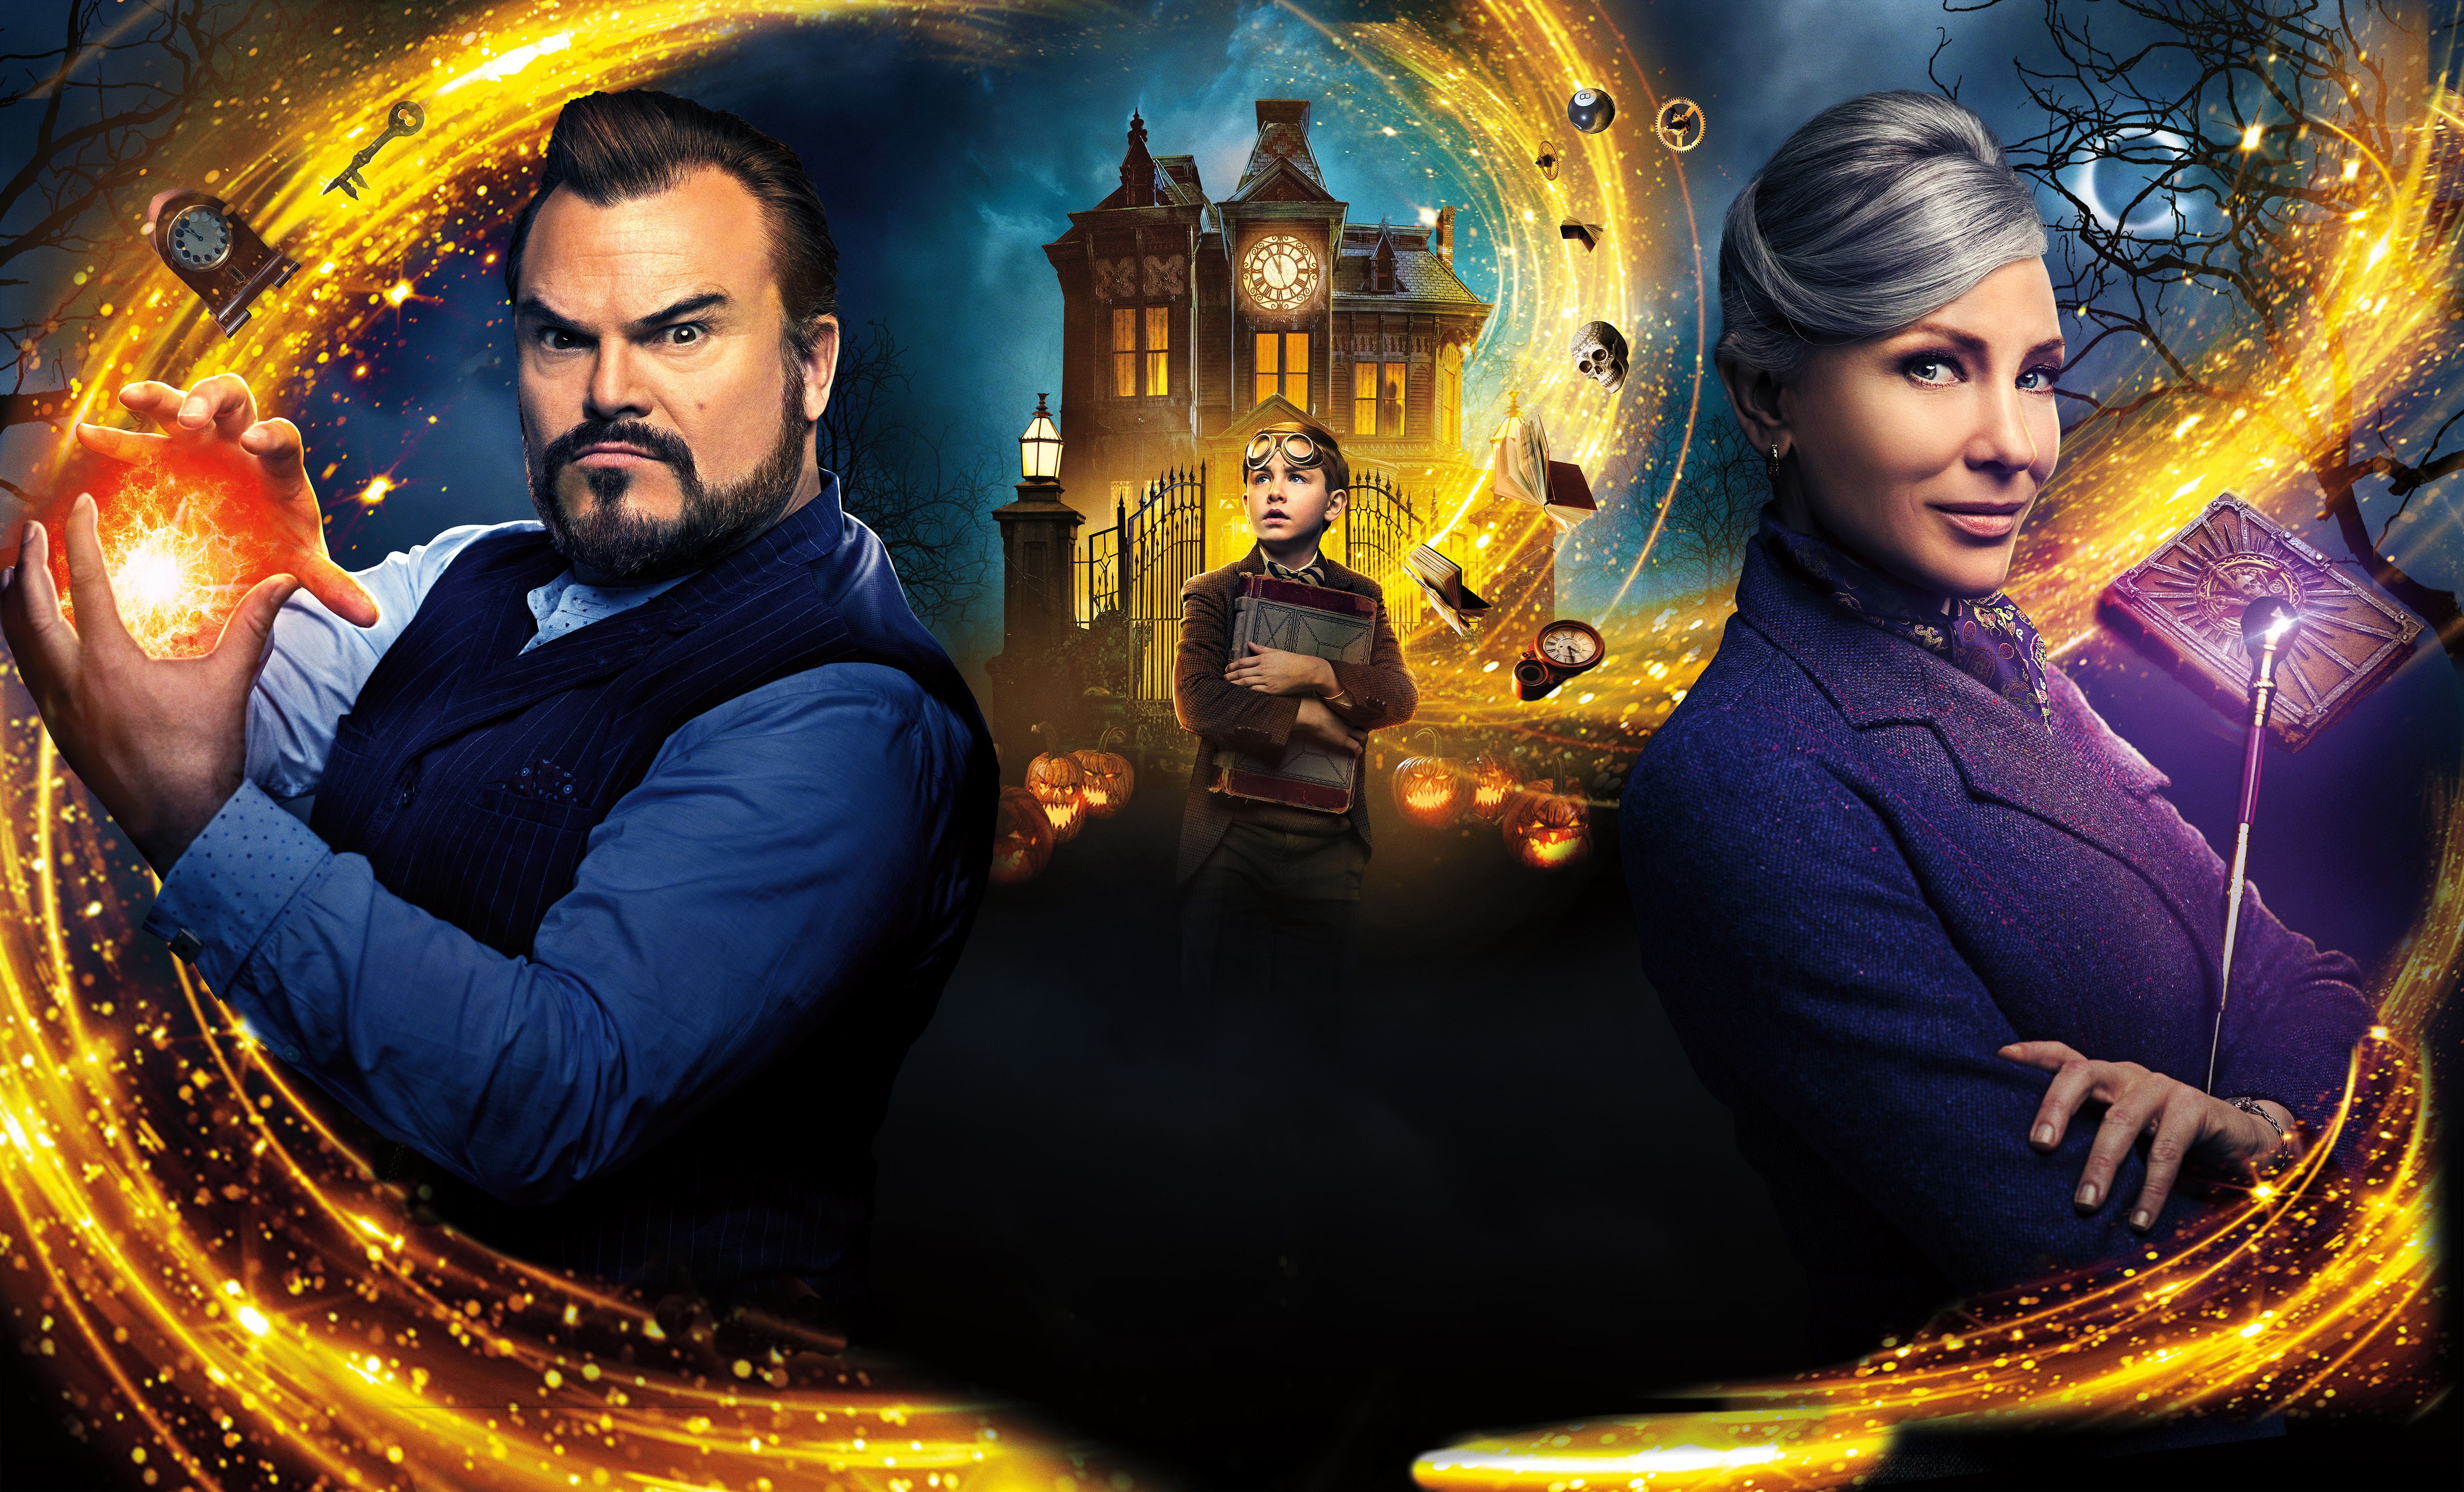 #The House with a Clock in Its Walls, #Jack Black, #Fantasy